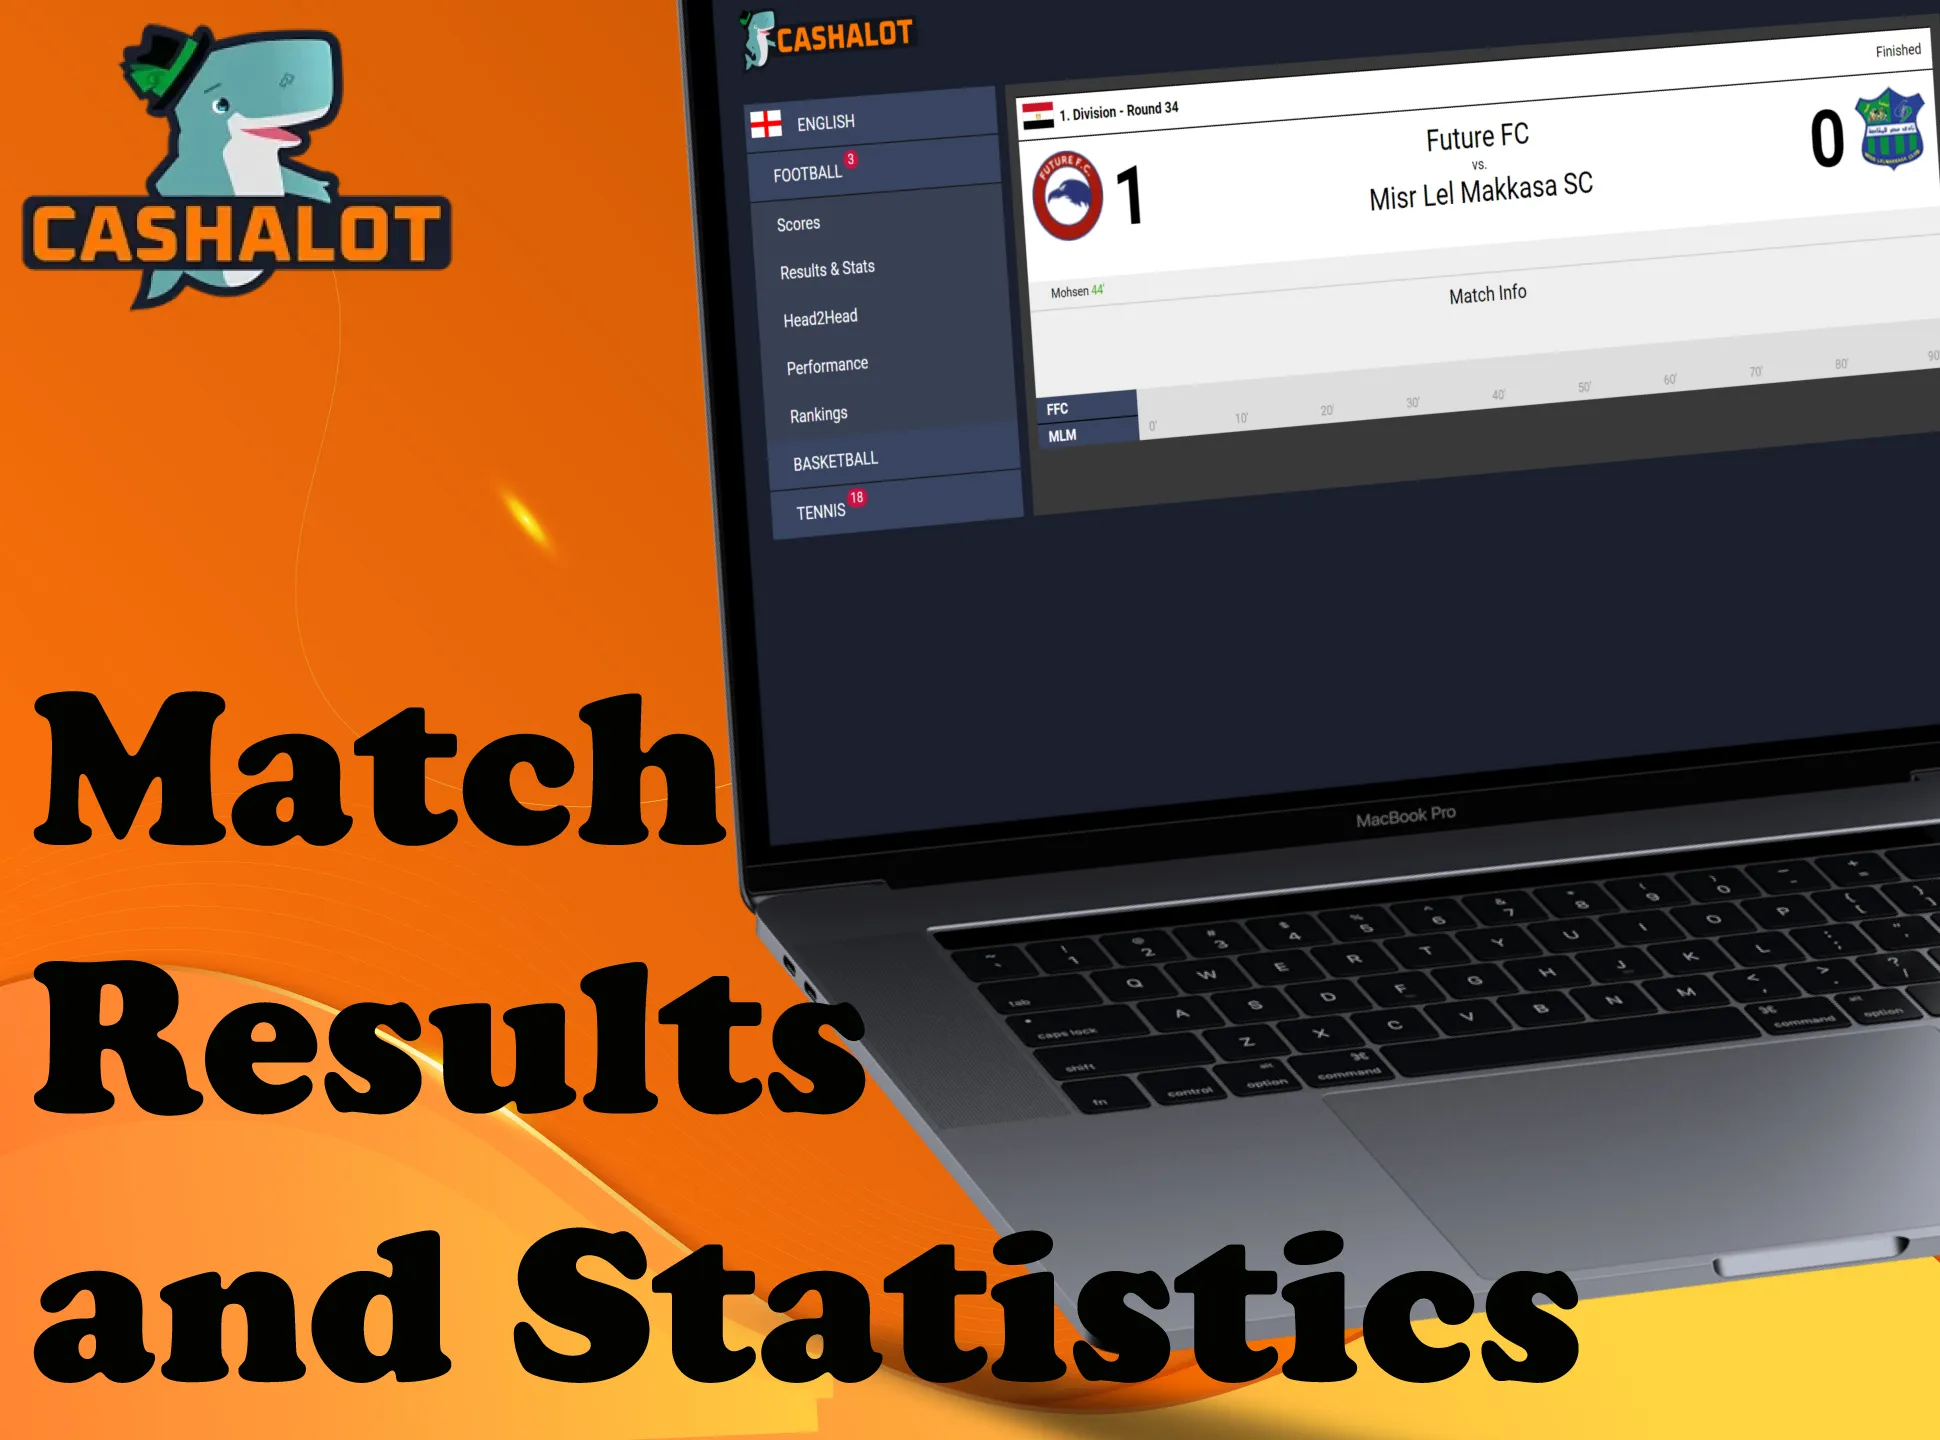 Watch the results of previous games on the Cashalot results page.